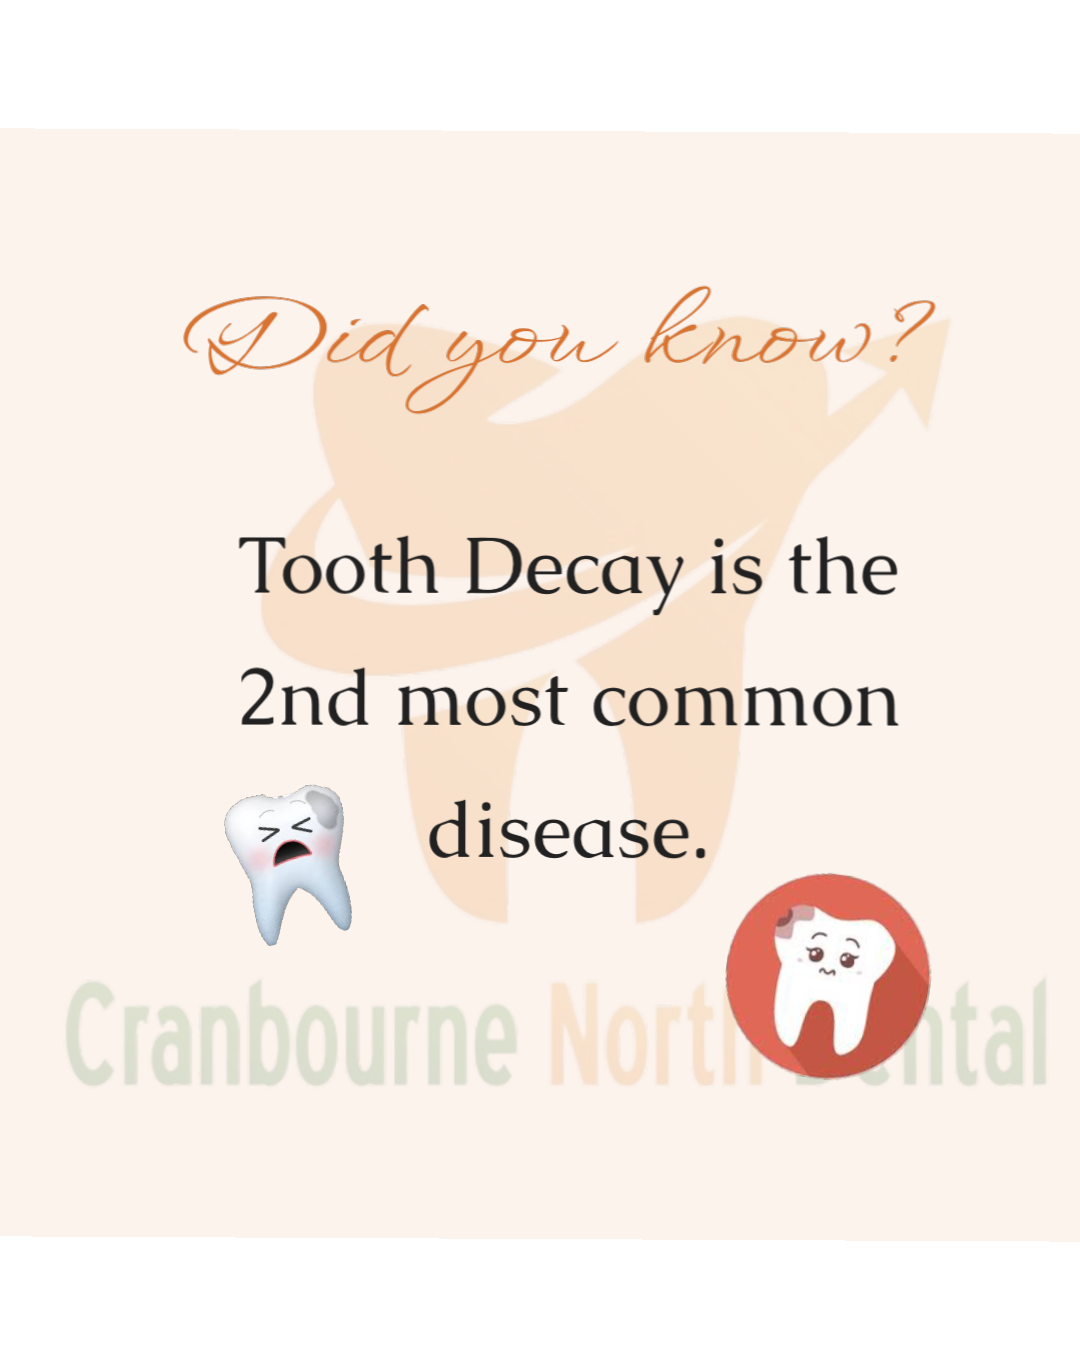 Did you know – Decay